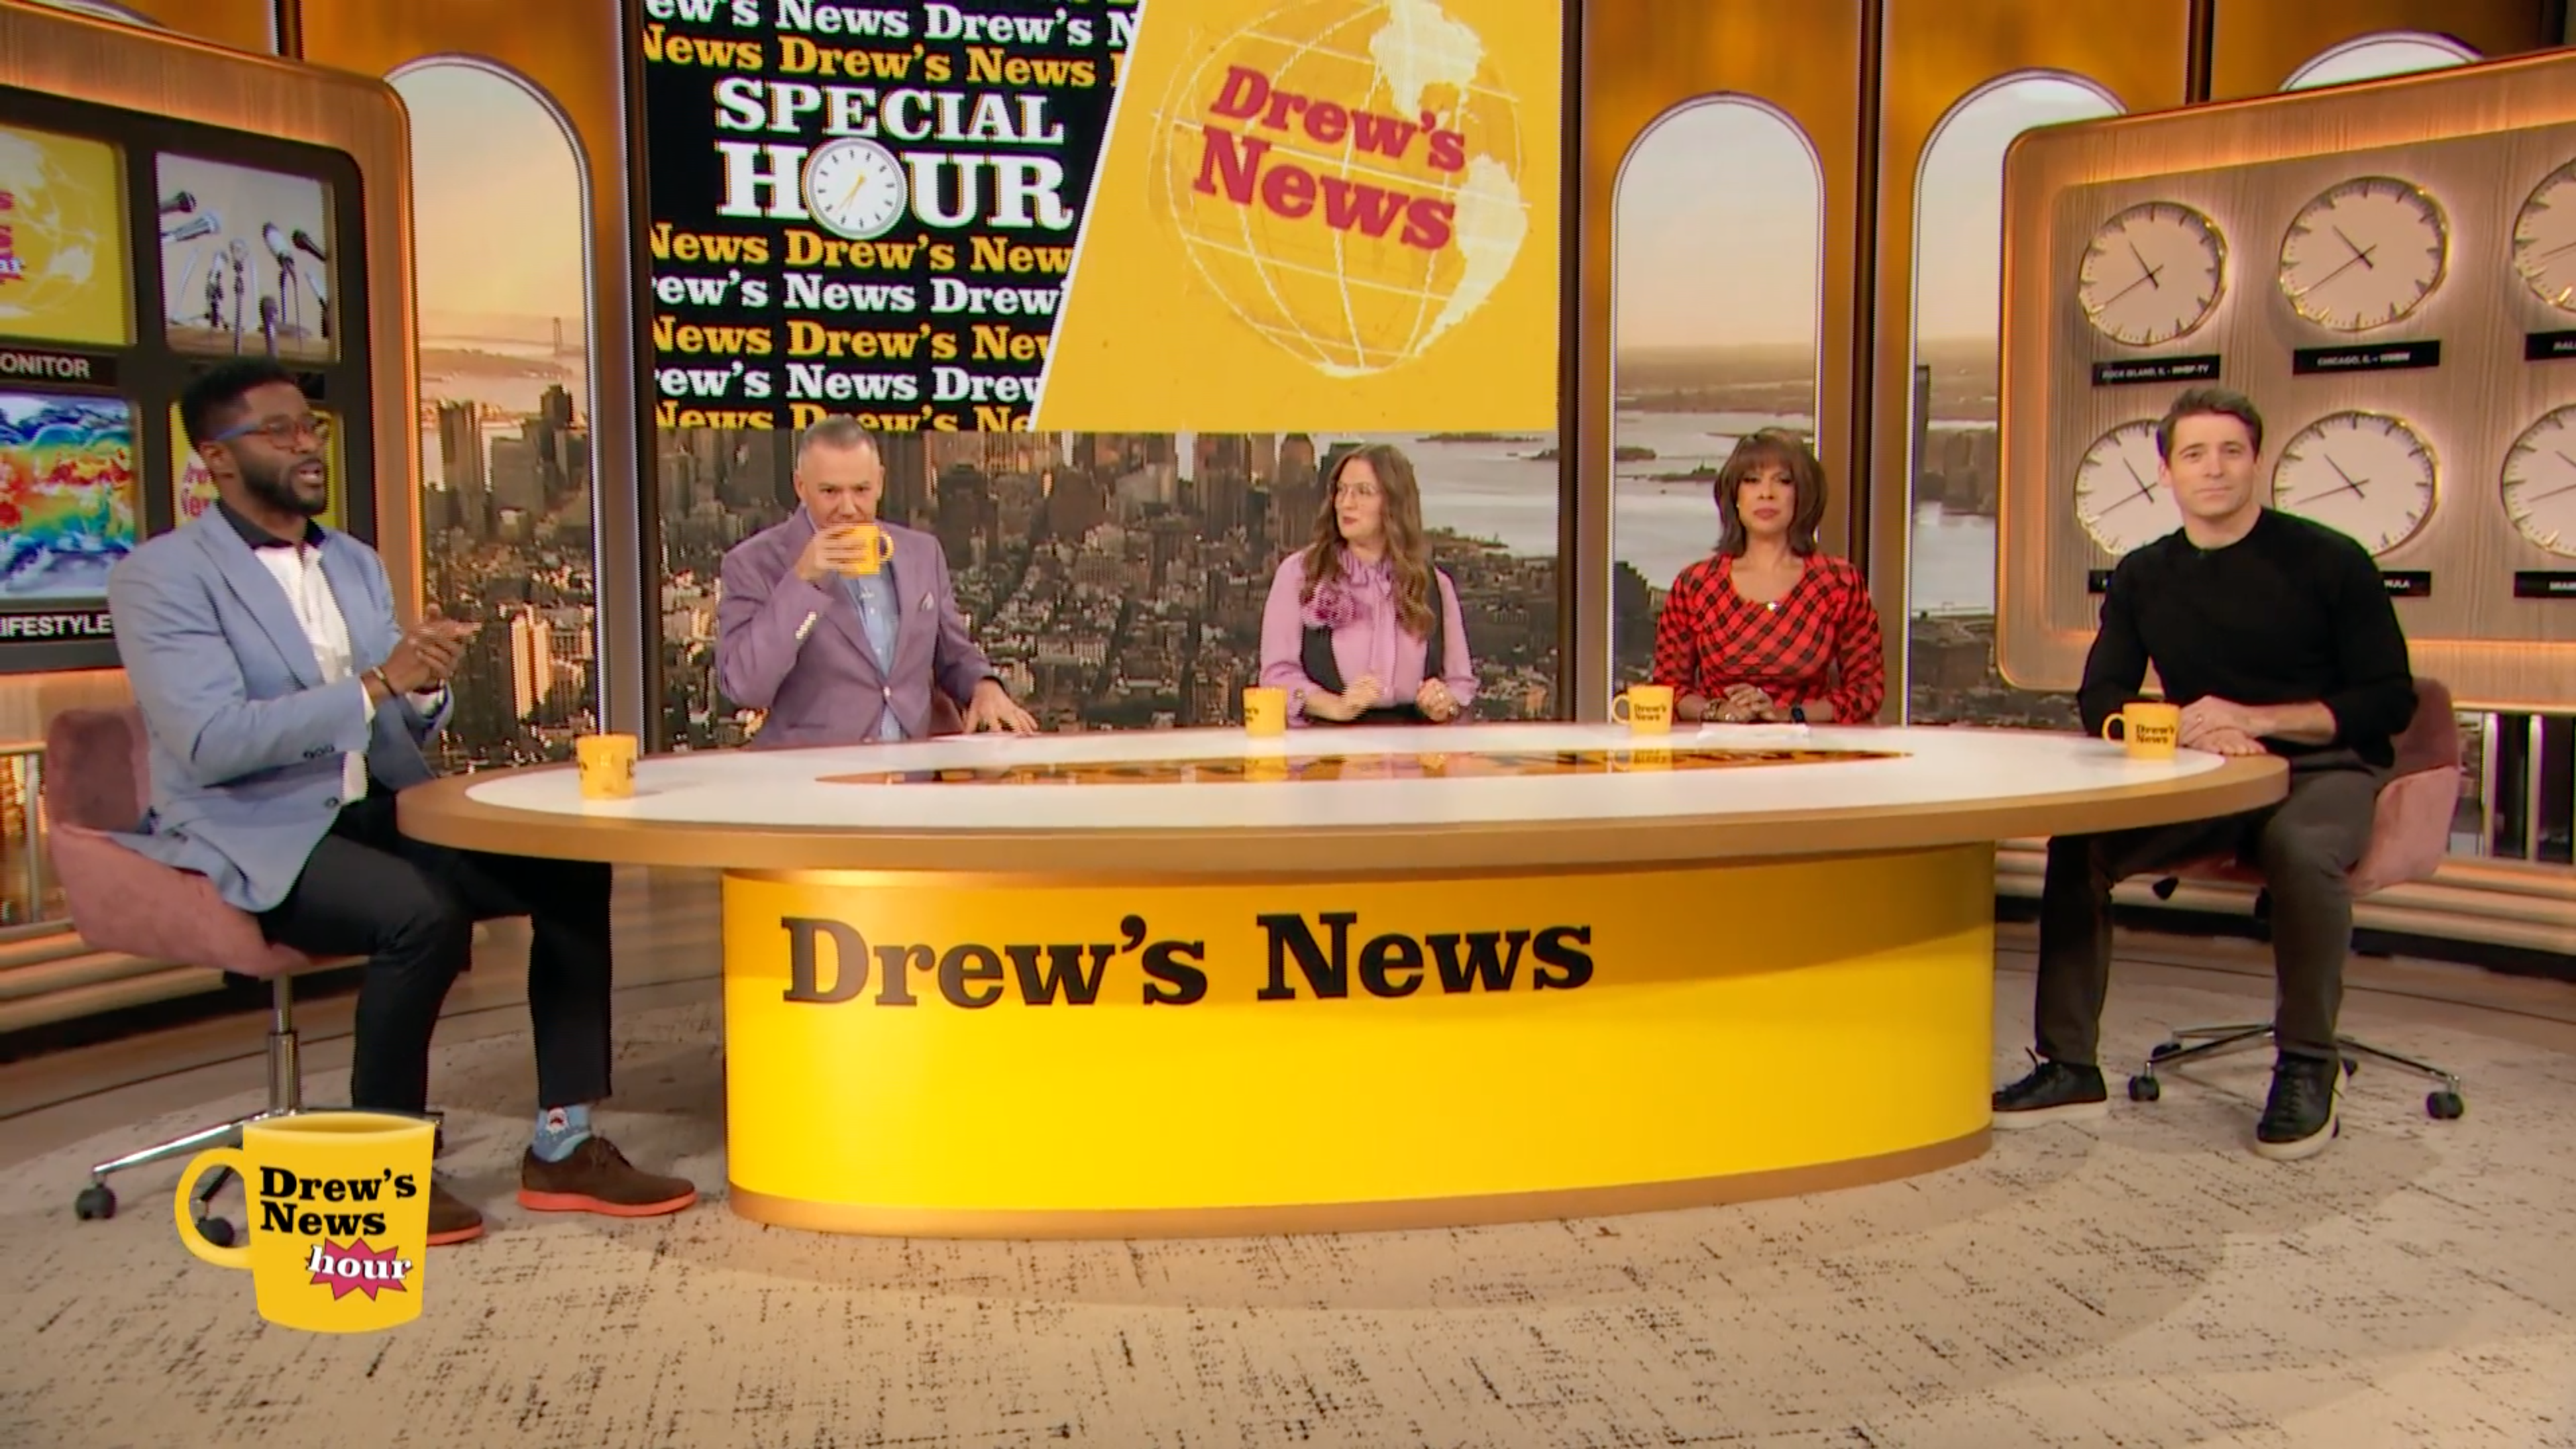 CBS Mornings Co-Hosts Gayle King, Tony Dokoupil, And Nate Burleson Will Join Drew Barrymore At The “Drew’s News” Desk